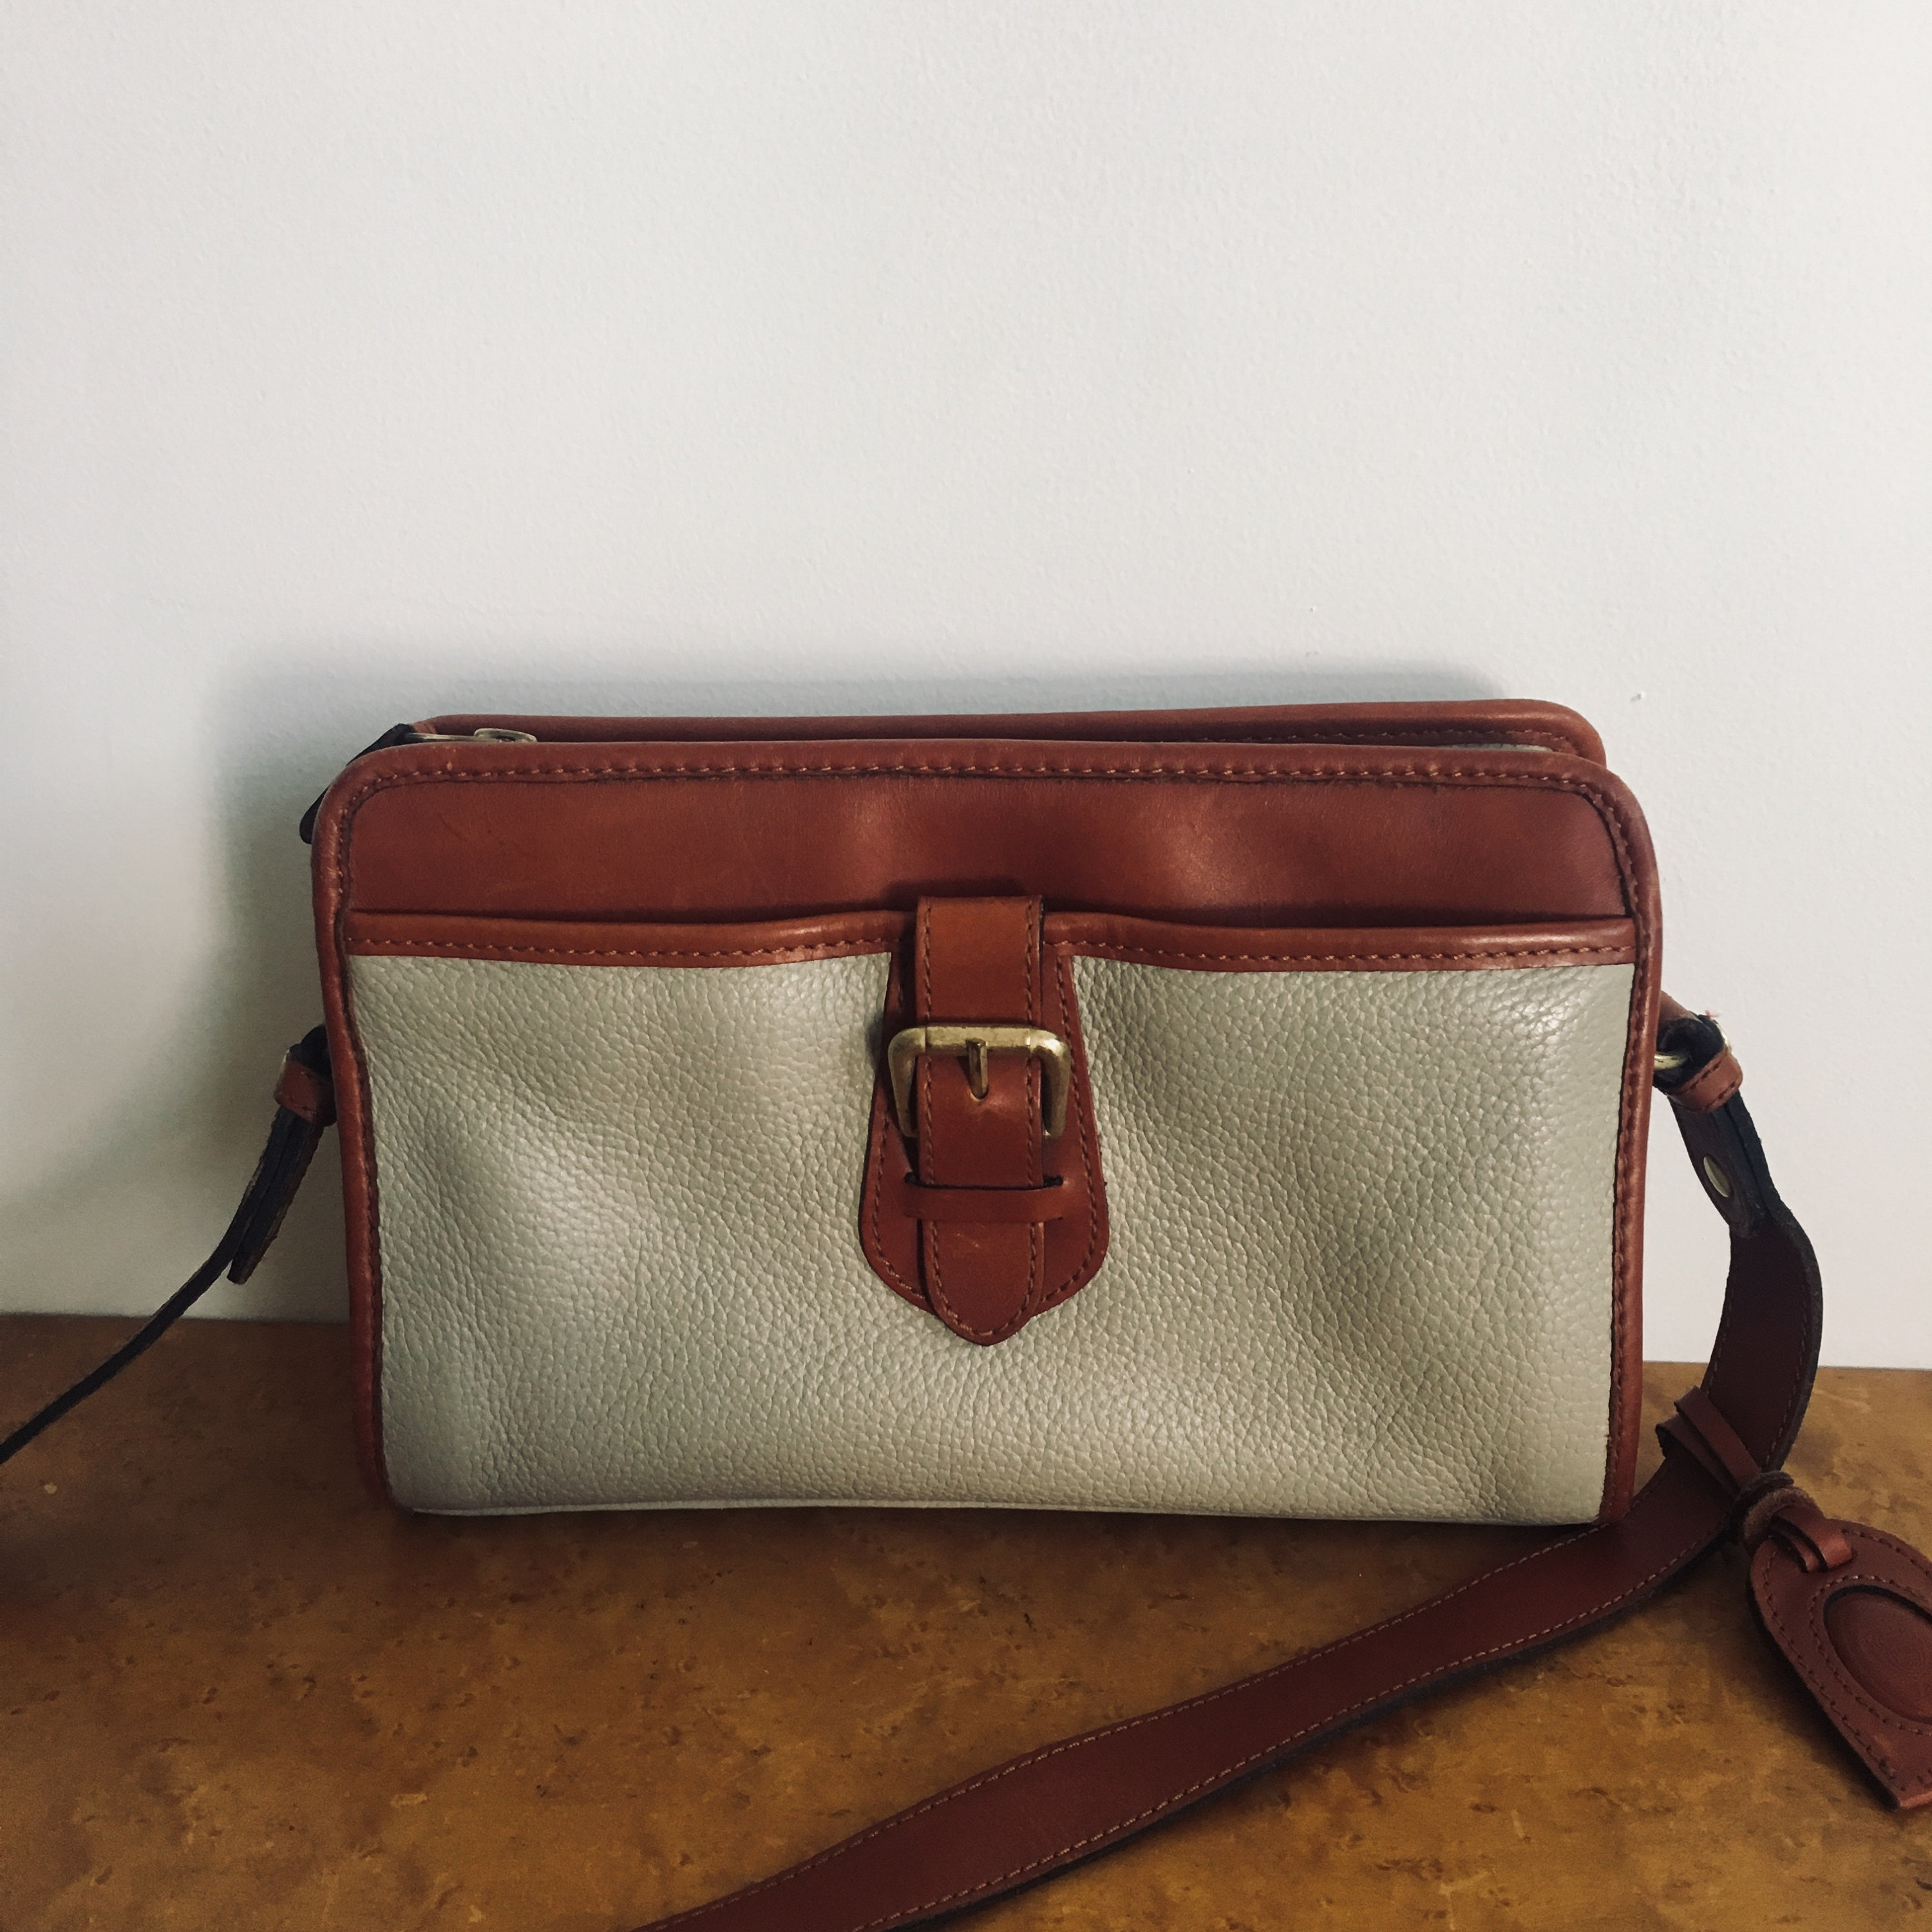 Are Liz Claiborne Bags Real Leather? The Ultimate Guide